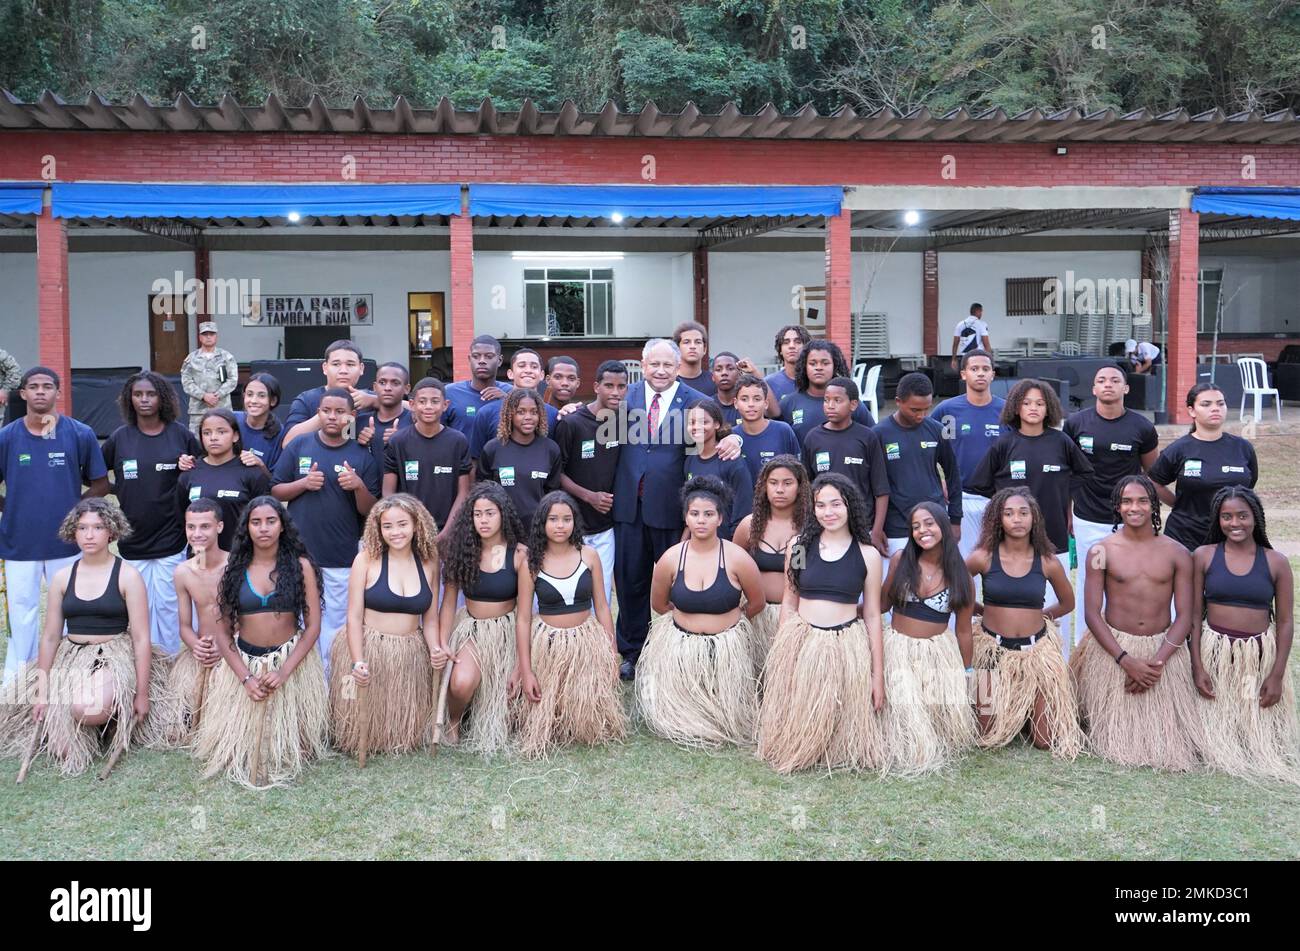 U.S. Secretary of the Navy Carlos Del Toro, poses for a photograph with the teenagers of the Brazilian Forcas no Esporte (Forces in Sport) program following their Brazilian jiu-jitsu inspired dance demonstration on the official opening day of exercise UNITAS LXIII at Ilha do Governador, Rio de Janeiro, Sept. 8, 2022. The Brazilian Forcas no Esporte program aims to reduce social risks of vulnerable young Brazilians, strengthen bonds of citizenship, inclusion, and social integration. The SECNAV toured the training location to visit with the host nation Brazilians as well as Marines from twelve p Stock Photo